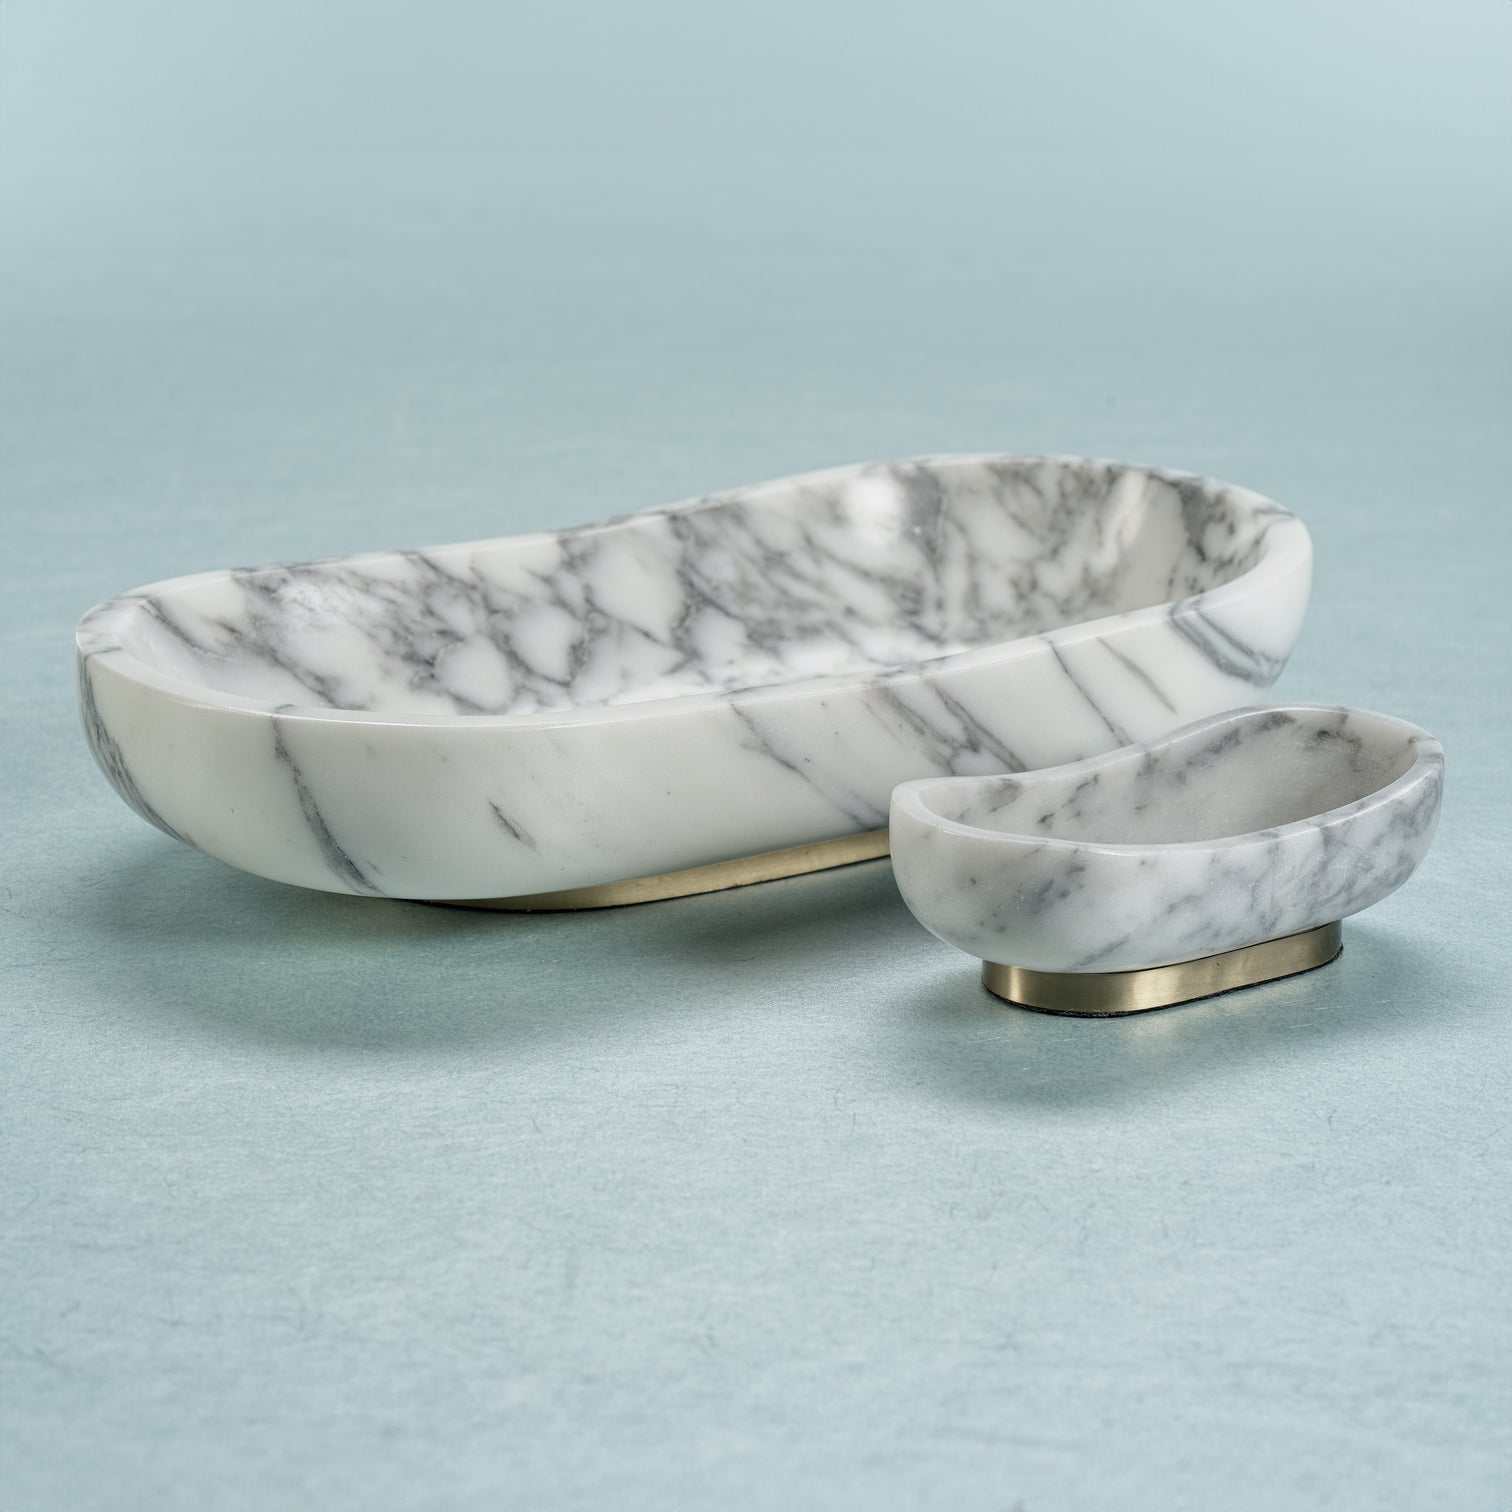 Arebascato Marble Oval Serving Bowl on Gold Metal Base